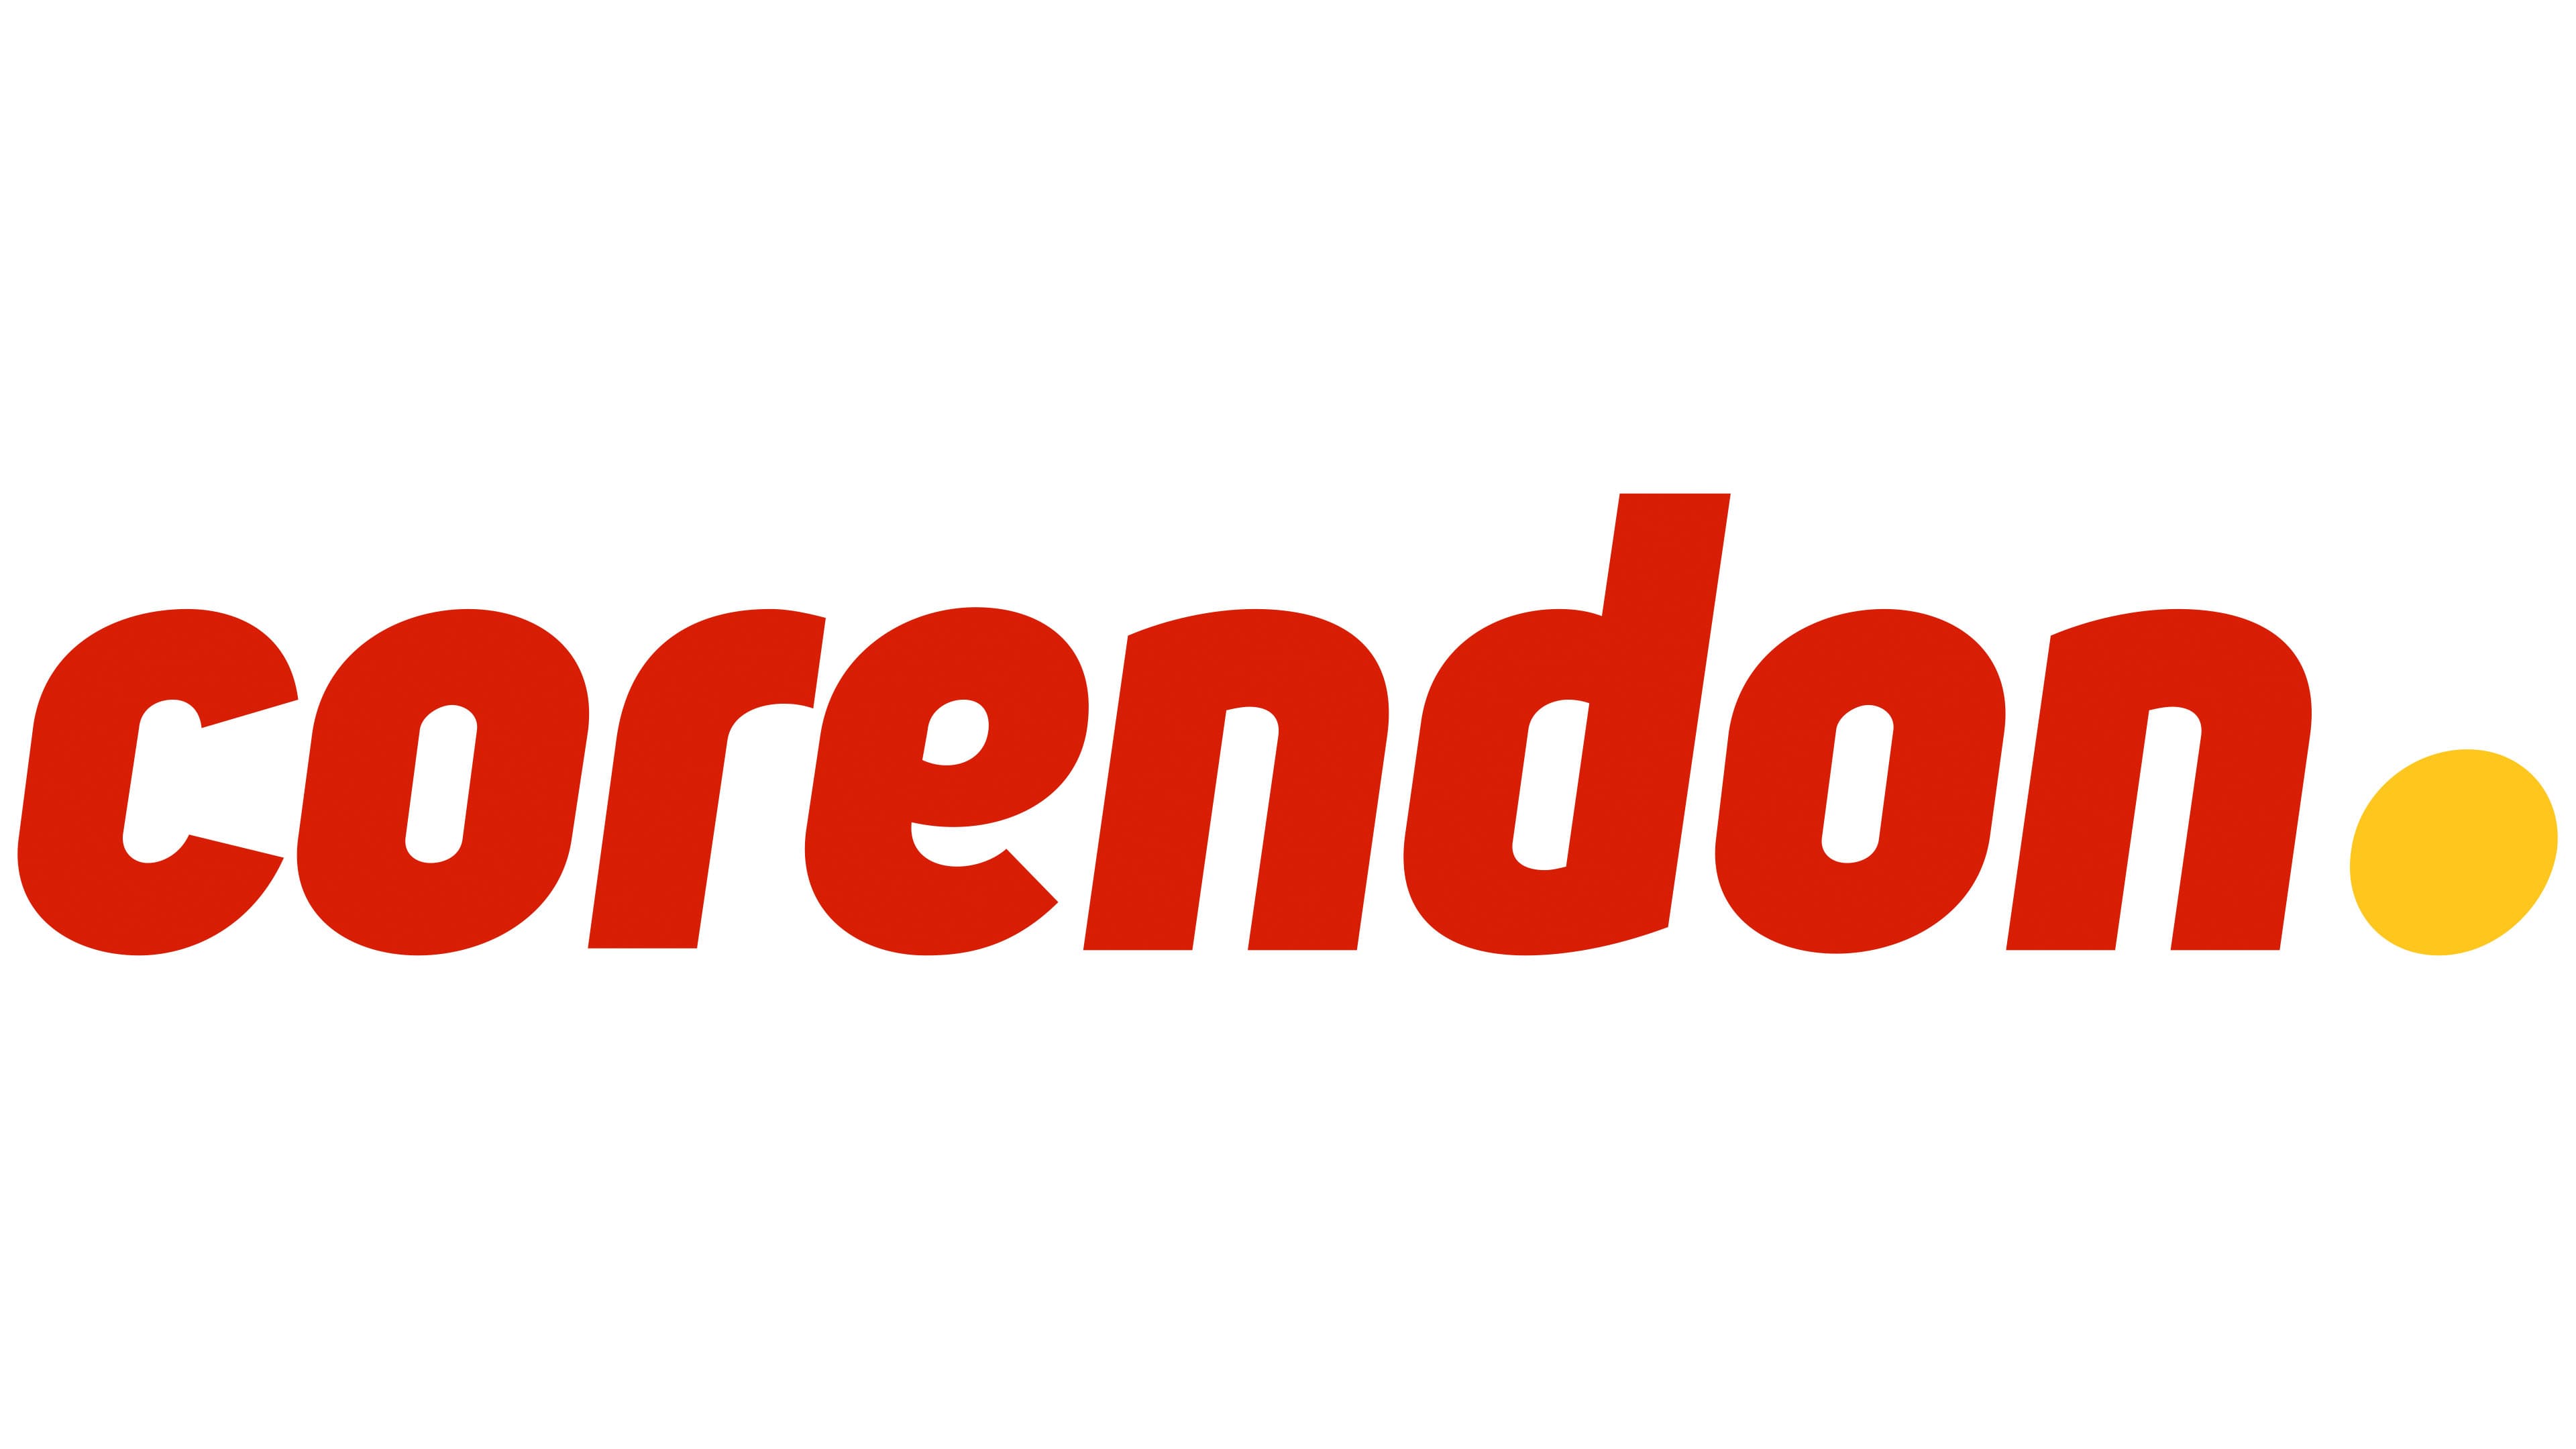 Corendon Dutch Airlines Logo, symbol, meaning, history, PNG, brand